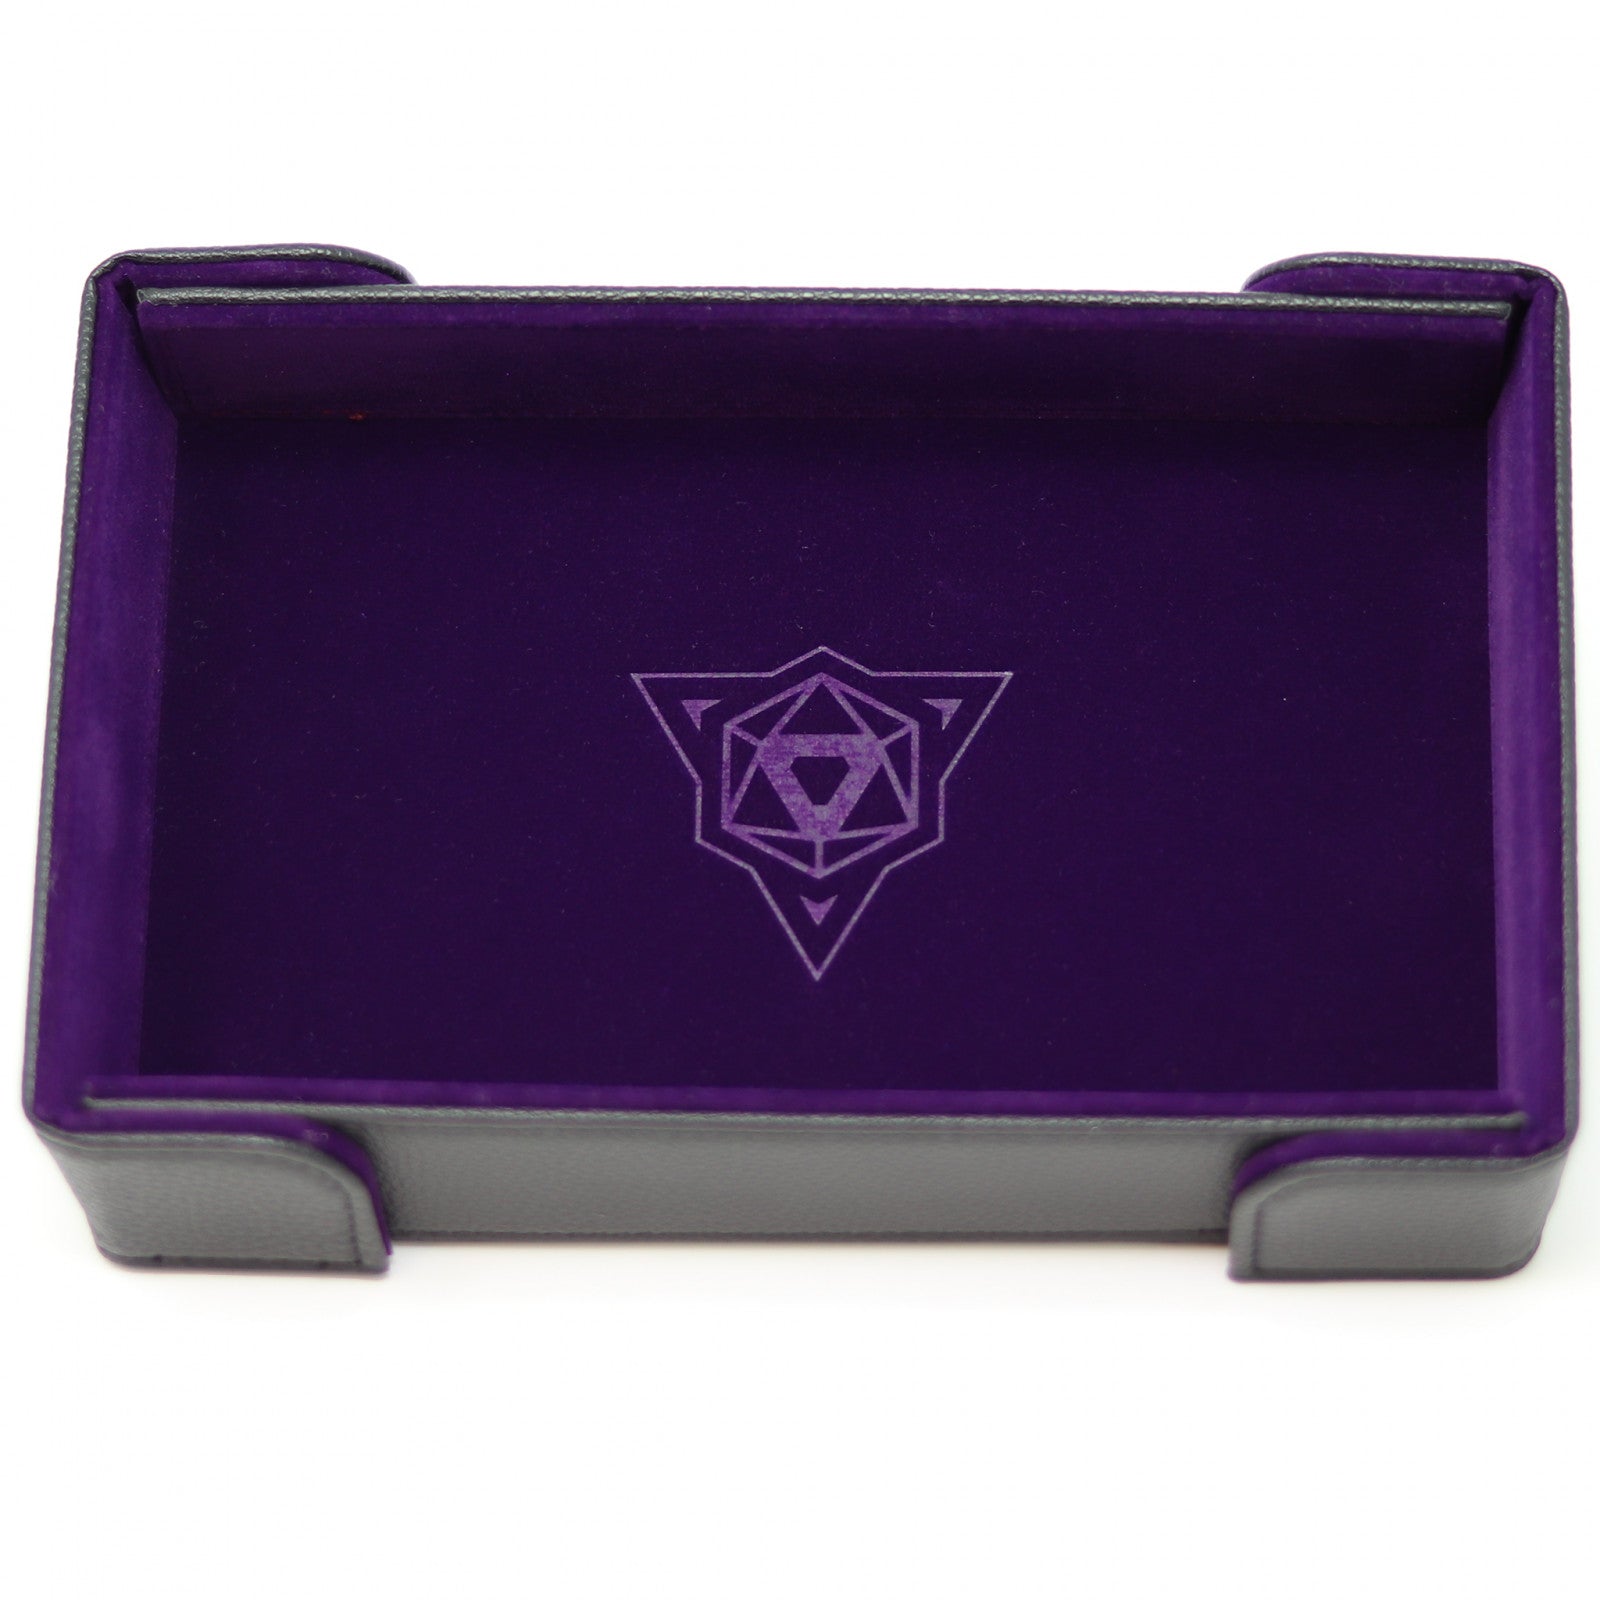 Die Hard Dice Folding Rectangle Tray - Purple Velvet Dice Tray Lets Play Games   